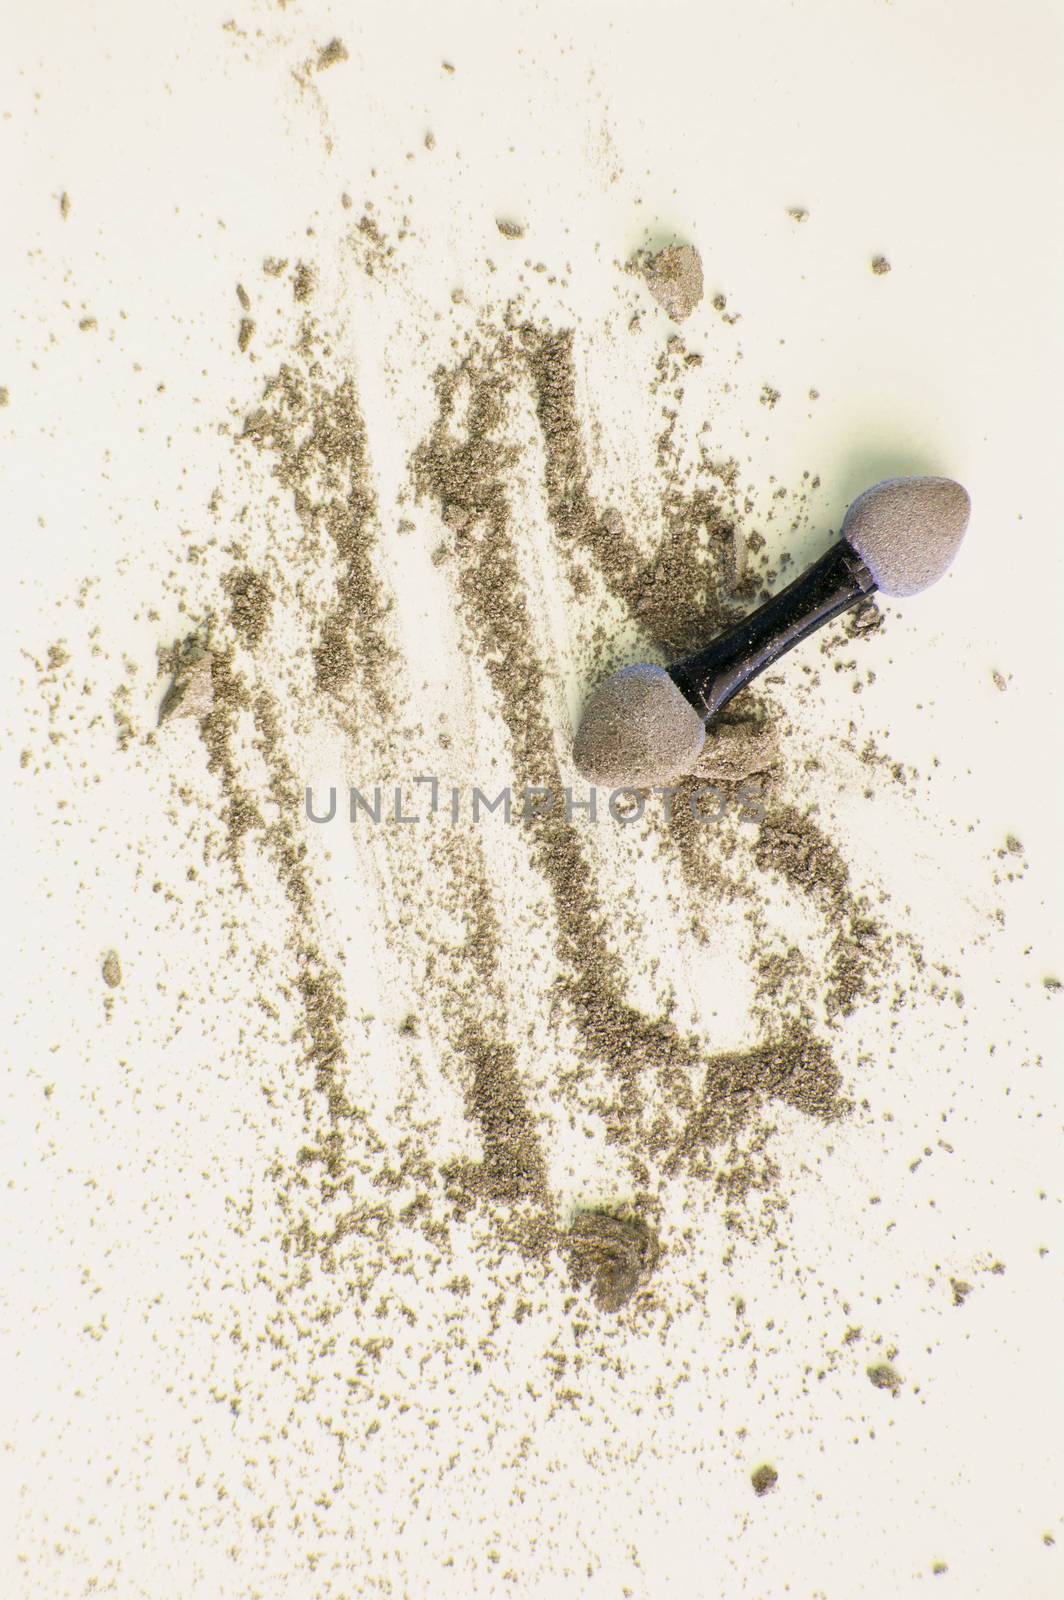 Golden and beige eyeshadow with applicator on white background, beauty and makeup concept, vertical shot by claire_lucia